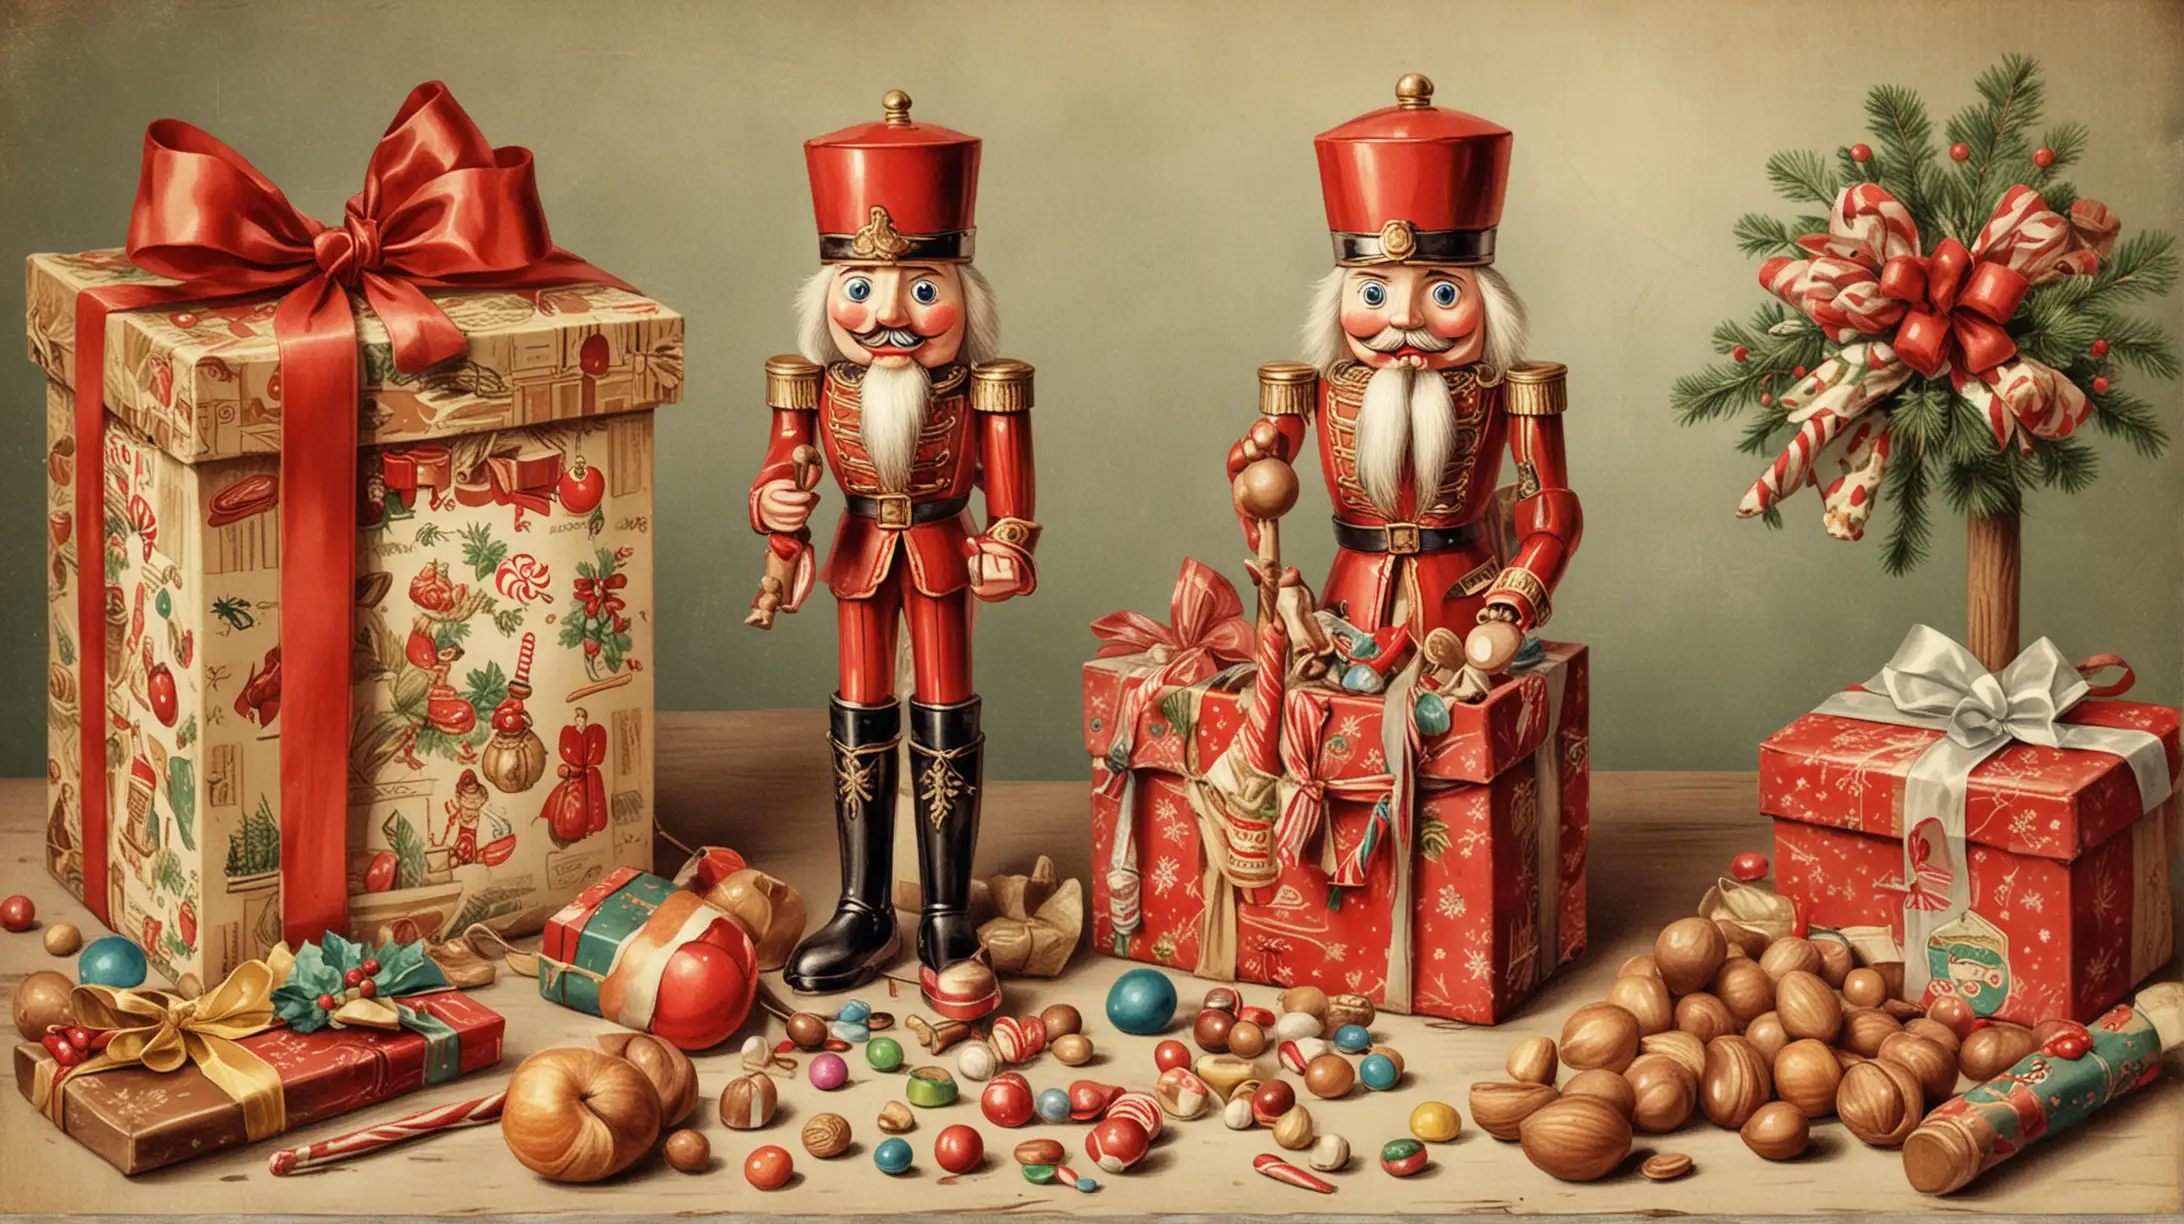 Vintage Christmas Illustration of Nutcracker with Candy and Gifts